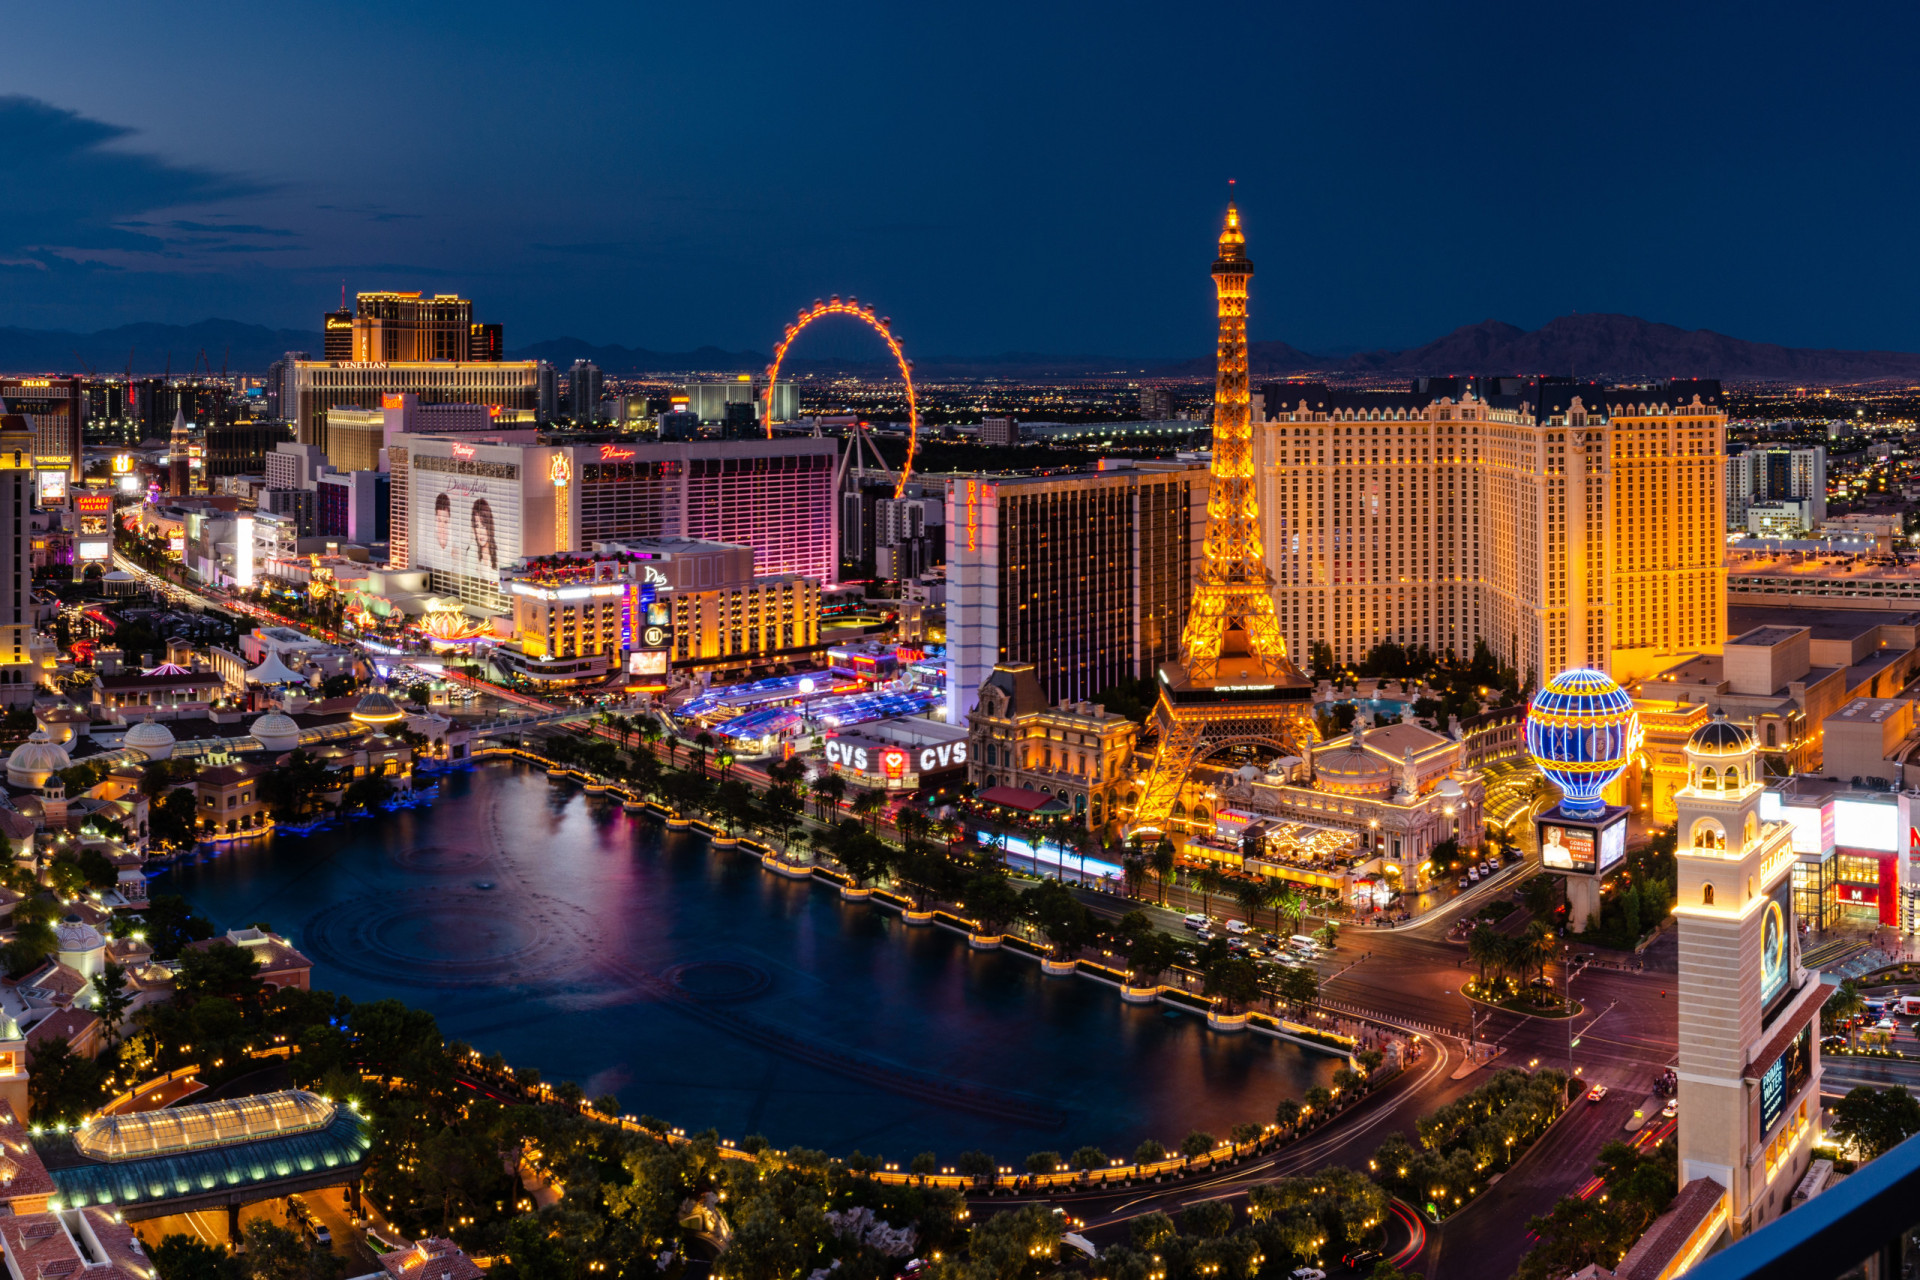 <p>This list would be incomplete if it did not include the entertainment capital of the world! Las Vegas is famous for its luxurious casino-hotels and nightlife, and the city’s location in the Nevada desert makes its weather quite warm for the summertime.</p><p>You may also like:<a href="https://www.starsinsider.com/n/414927?utm_source=msn.com&utm_medium=display&utm_campaign=referral_description&utm_content=700885en-us"> Flights of fancy: the most colorful and exotic birds on the planet</a></p>